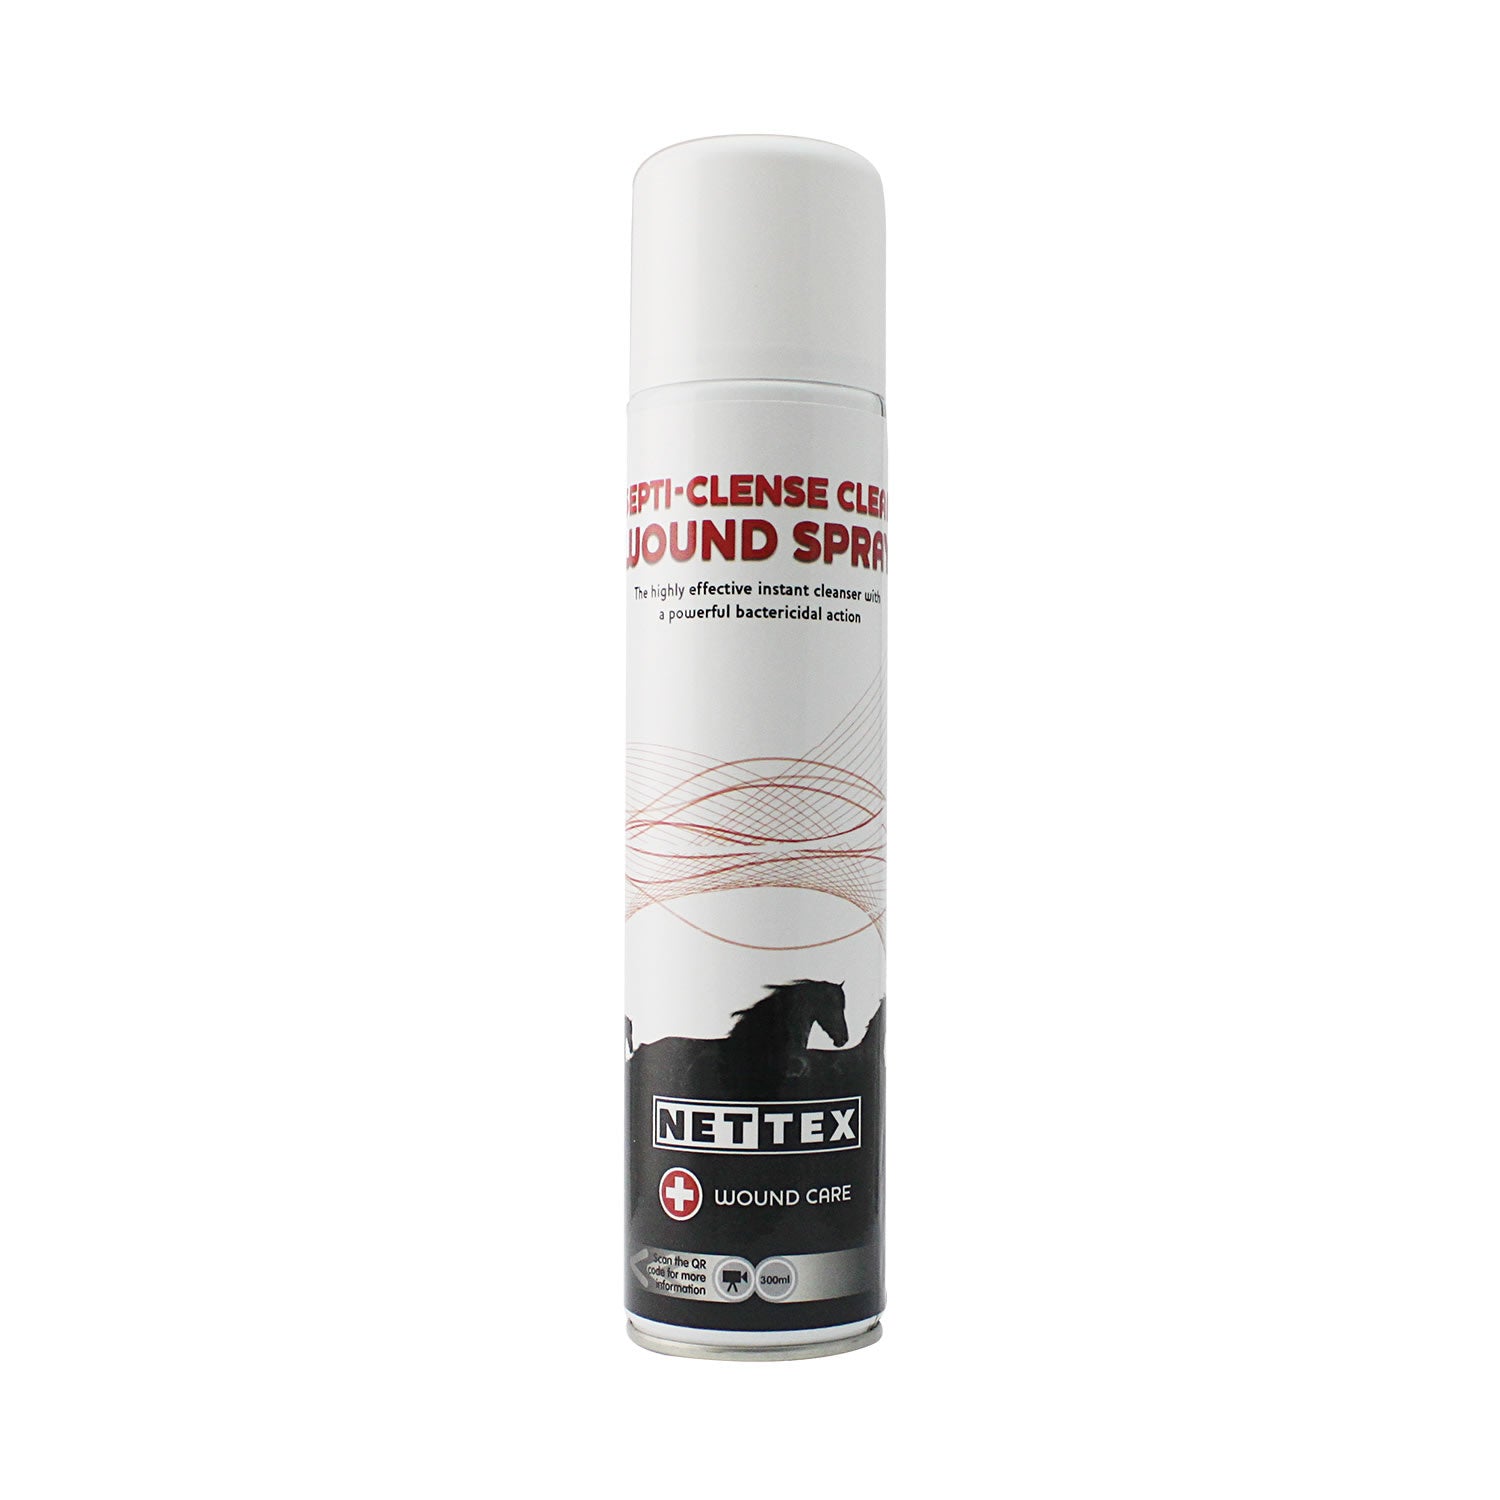 Nettex Equine Septi-Clense Clear Wound Care